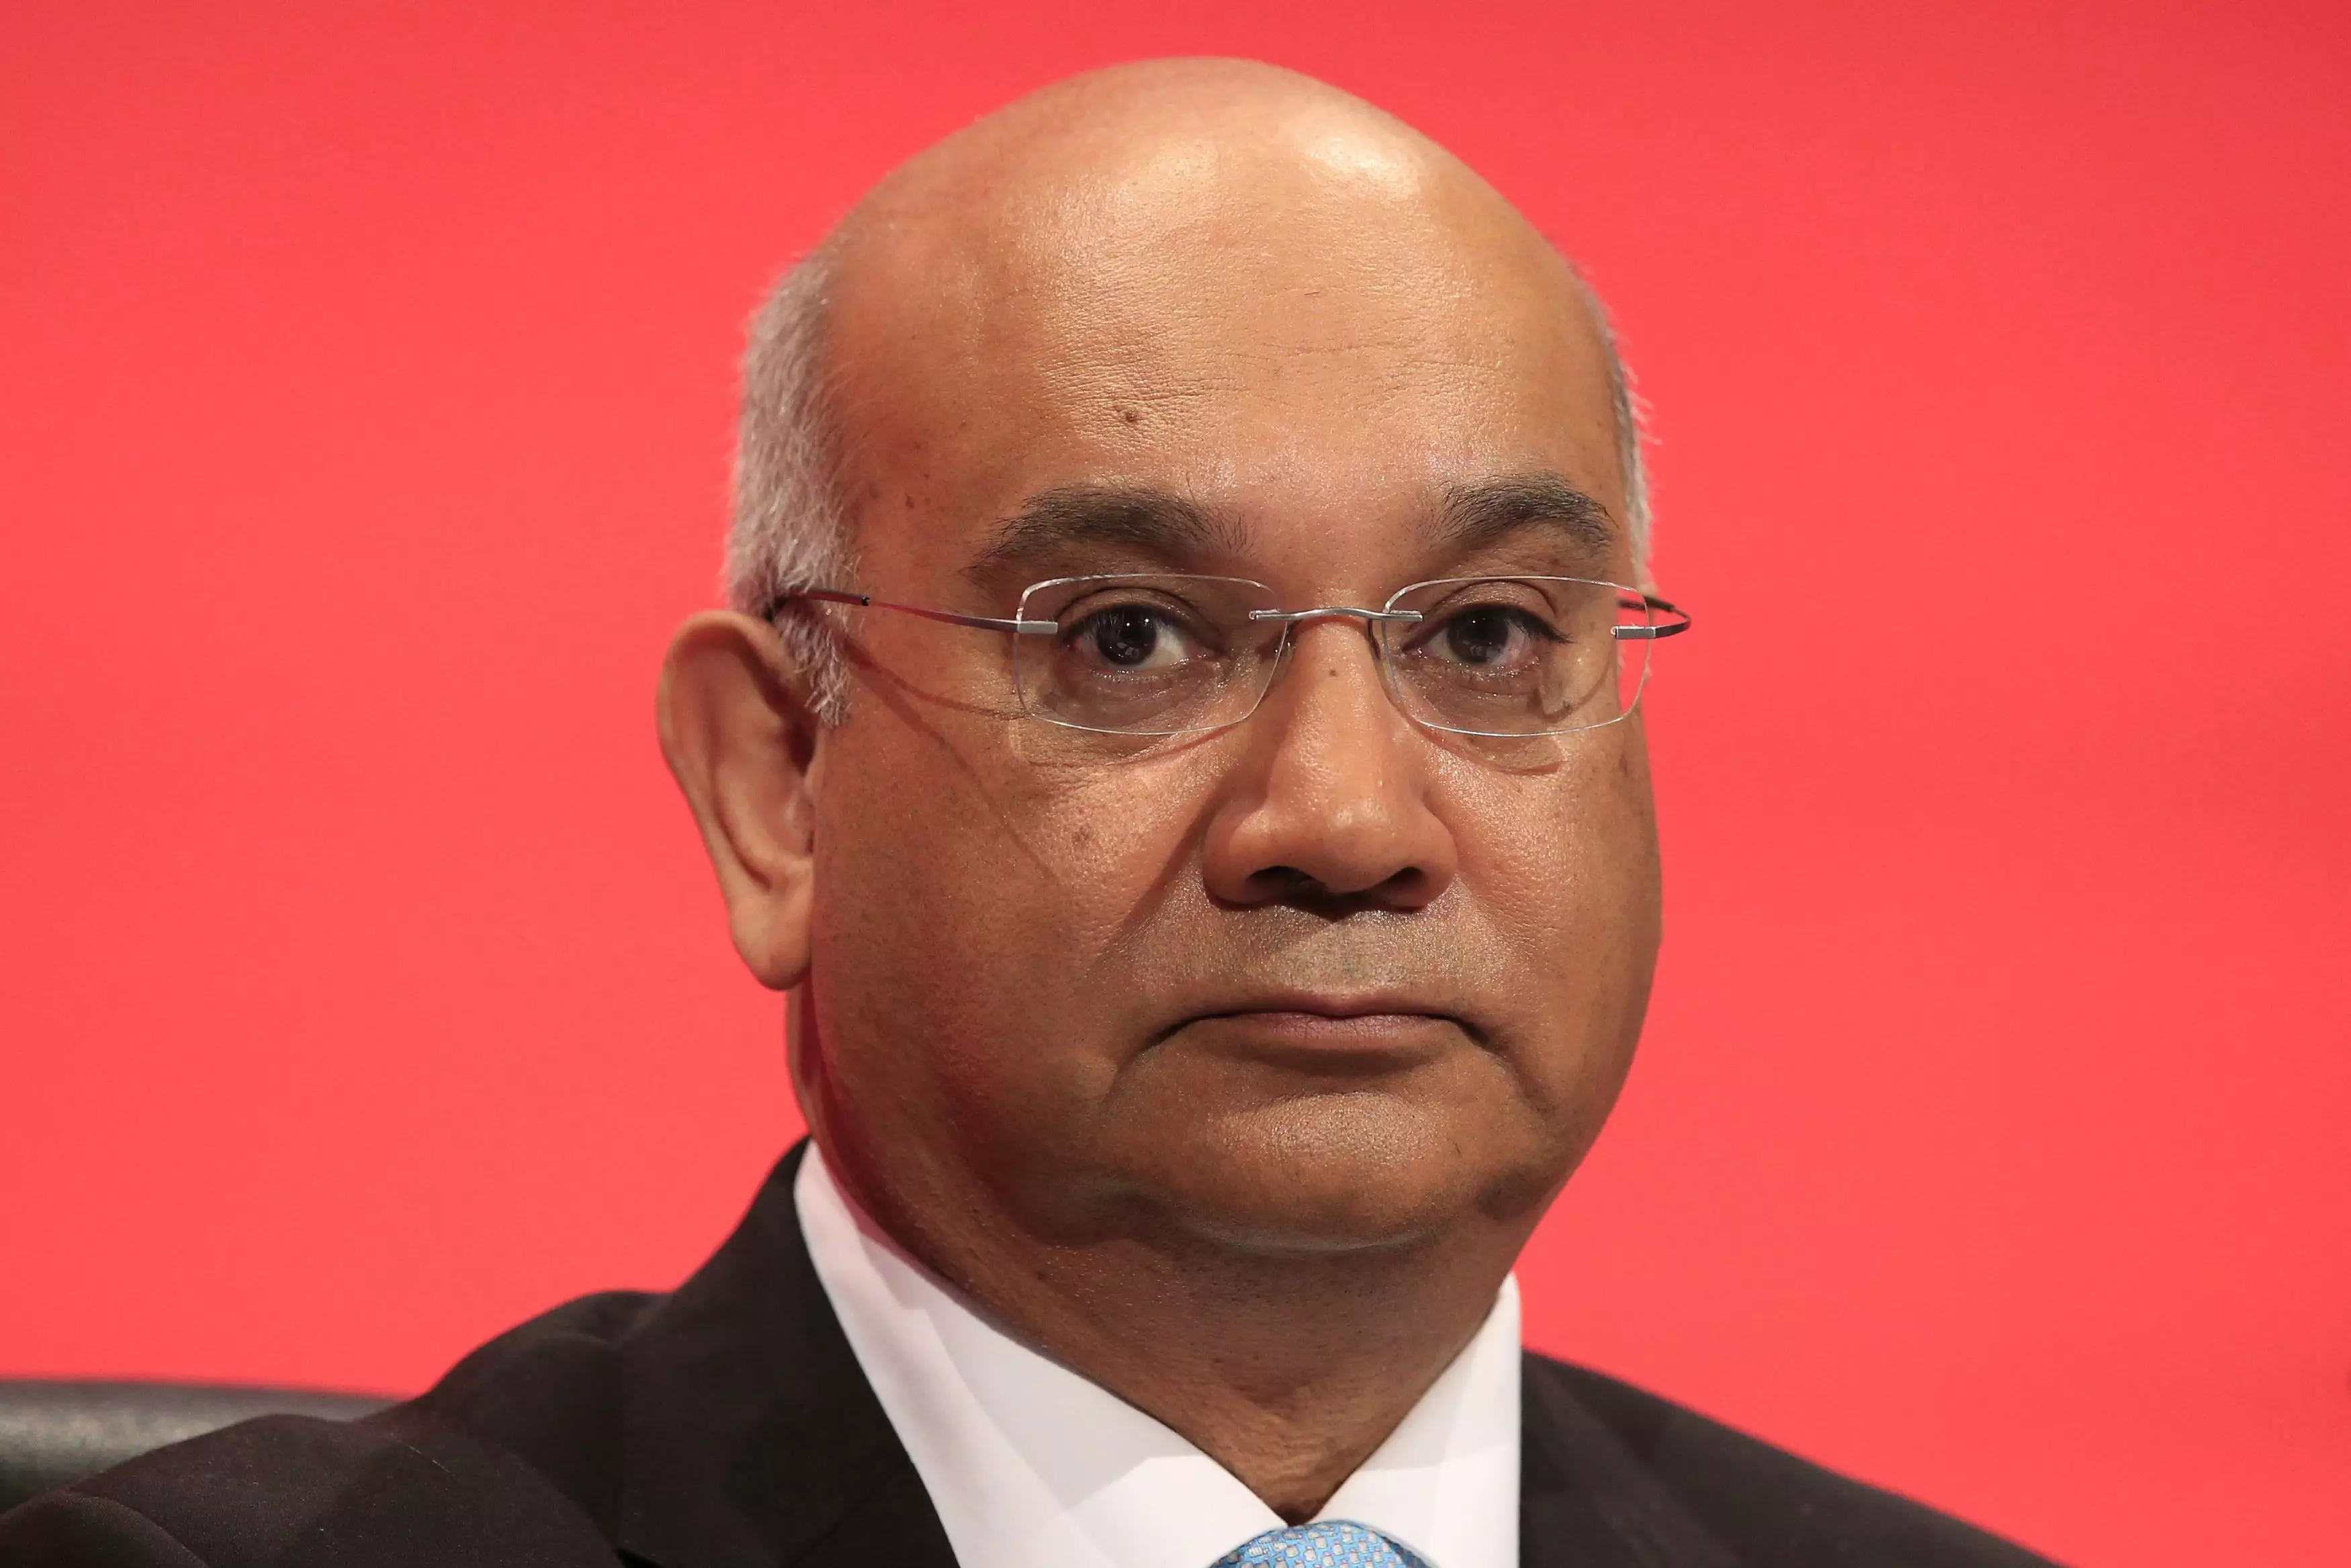 MP Keith Vaz Resigns After Having Sex With Male Escorts And Talking About Cocaine